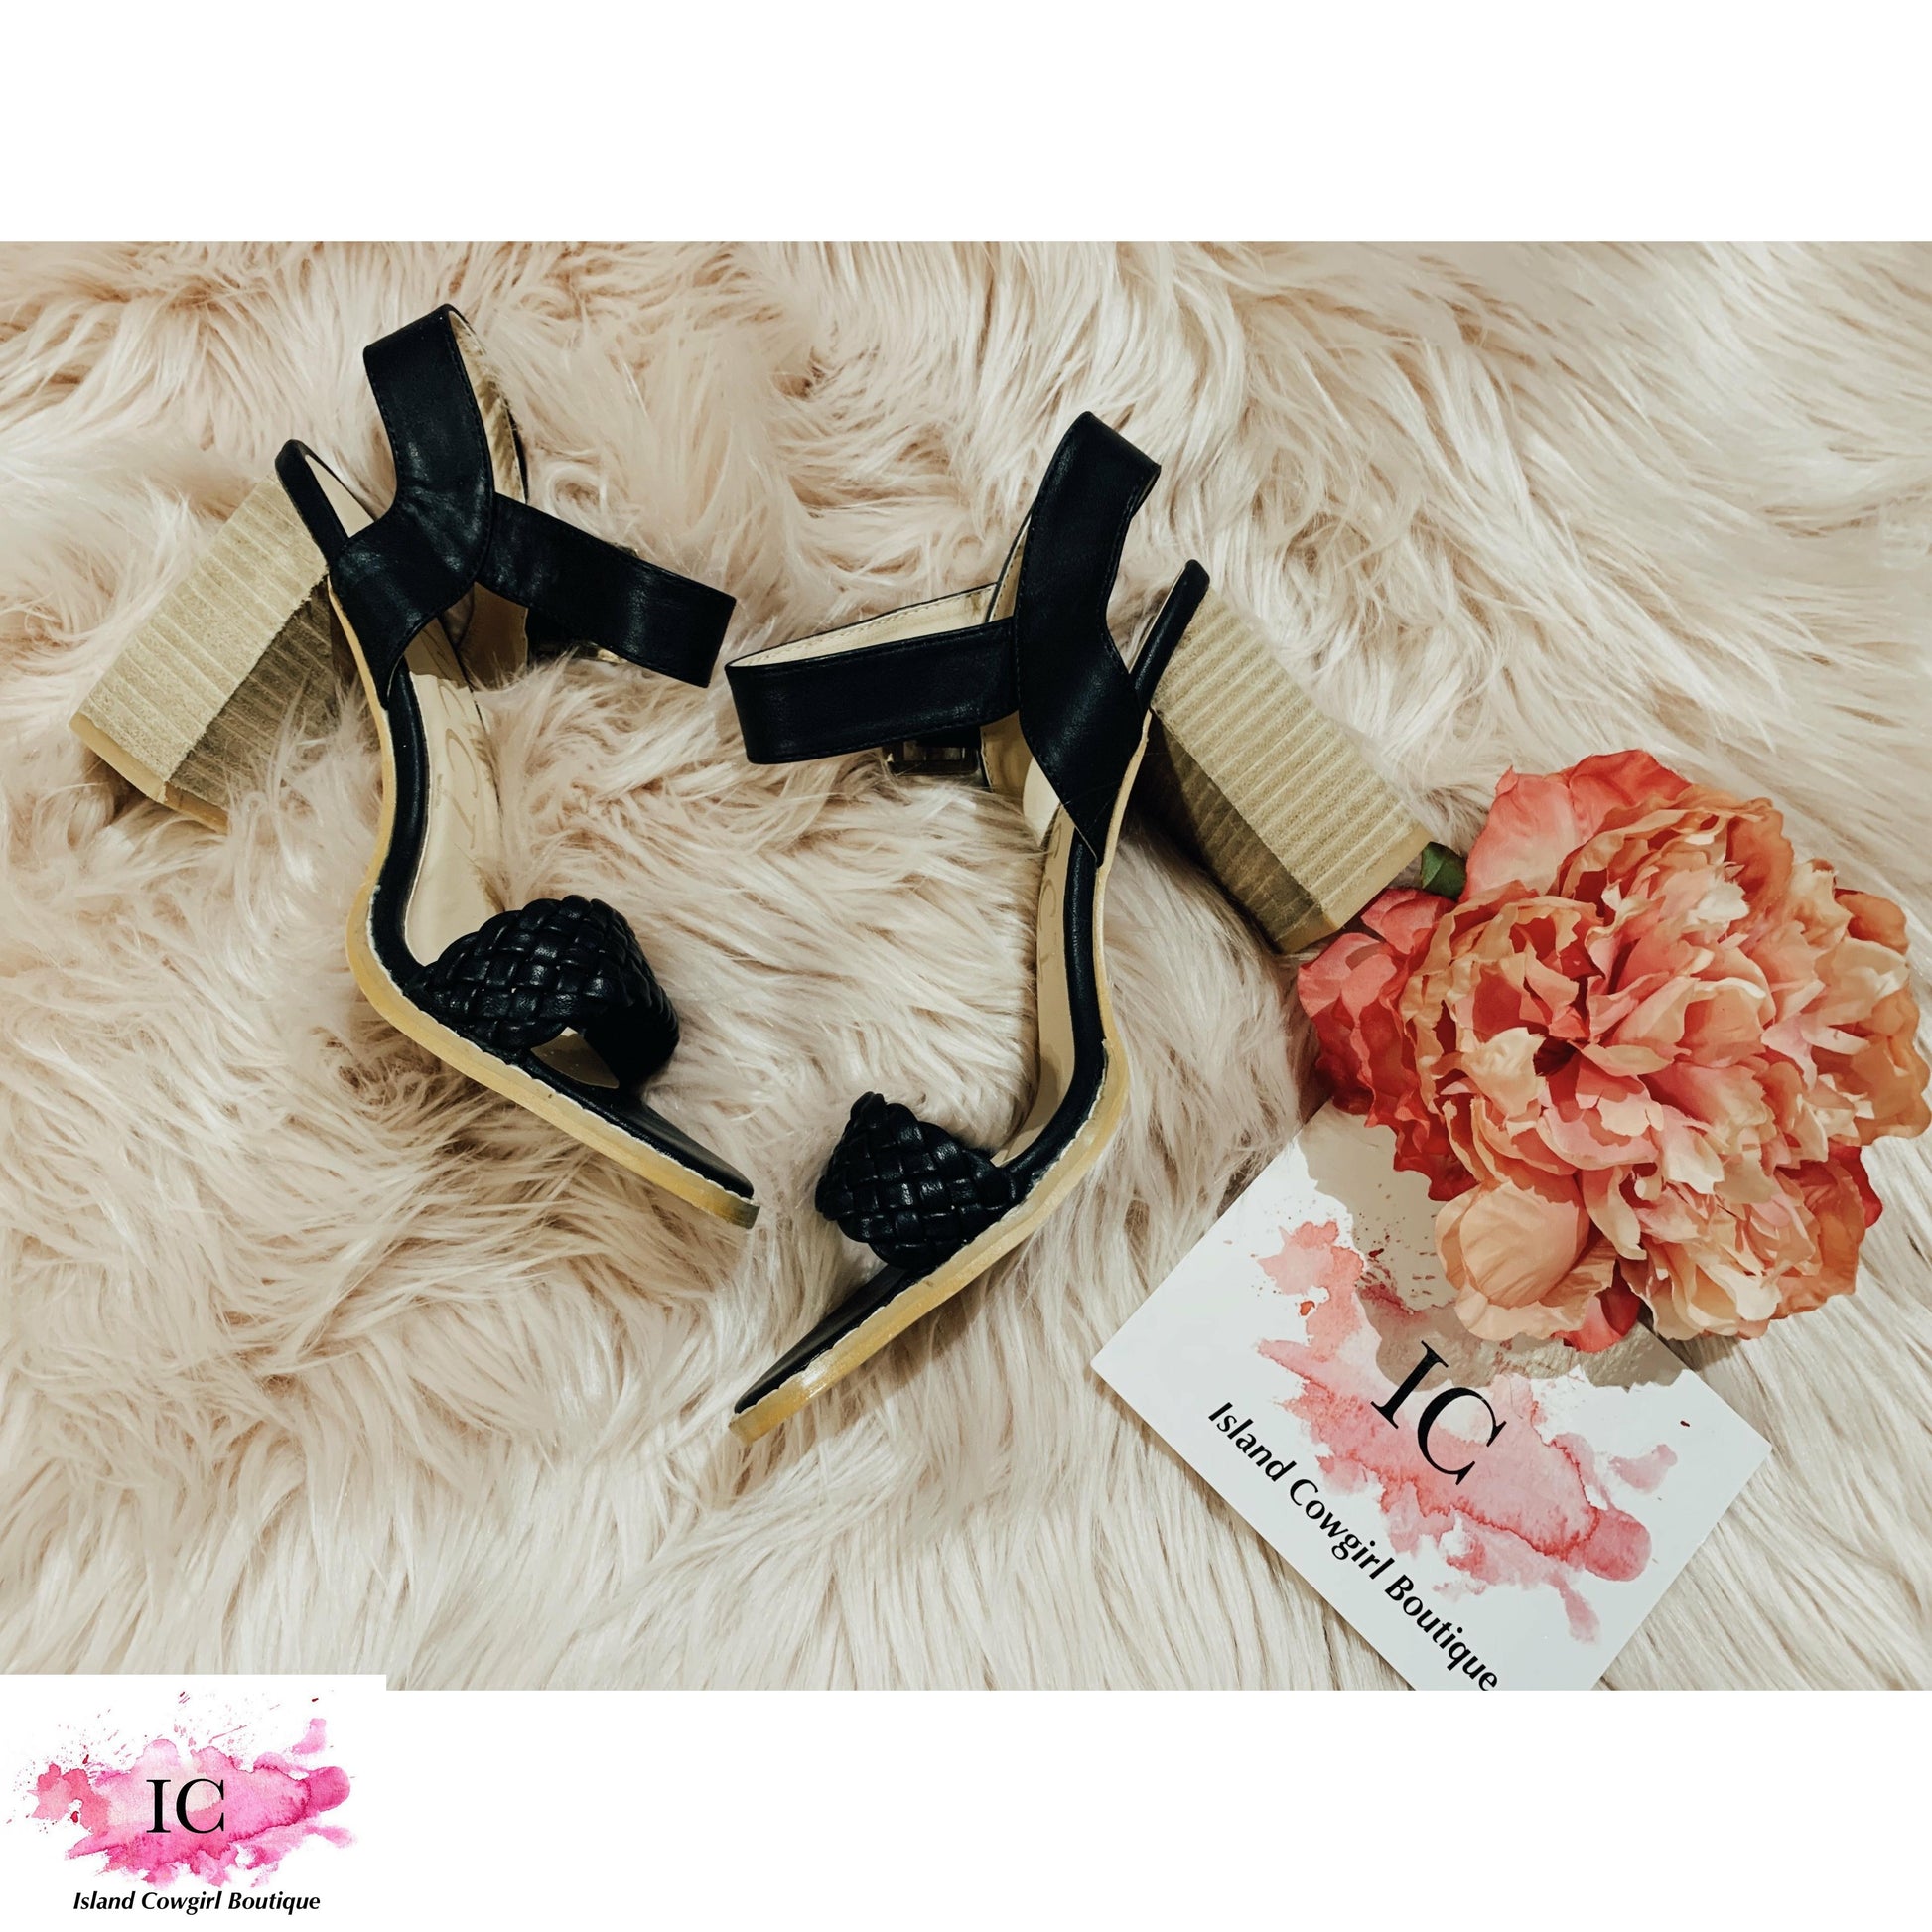 Take A Stand Black Wedge Sandals, Boutique shoes, women's black wedge heels